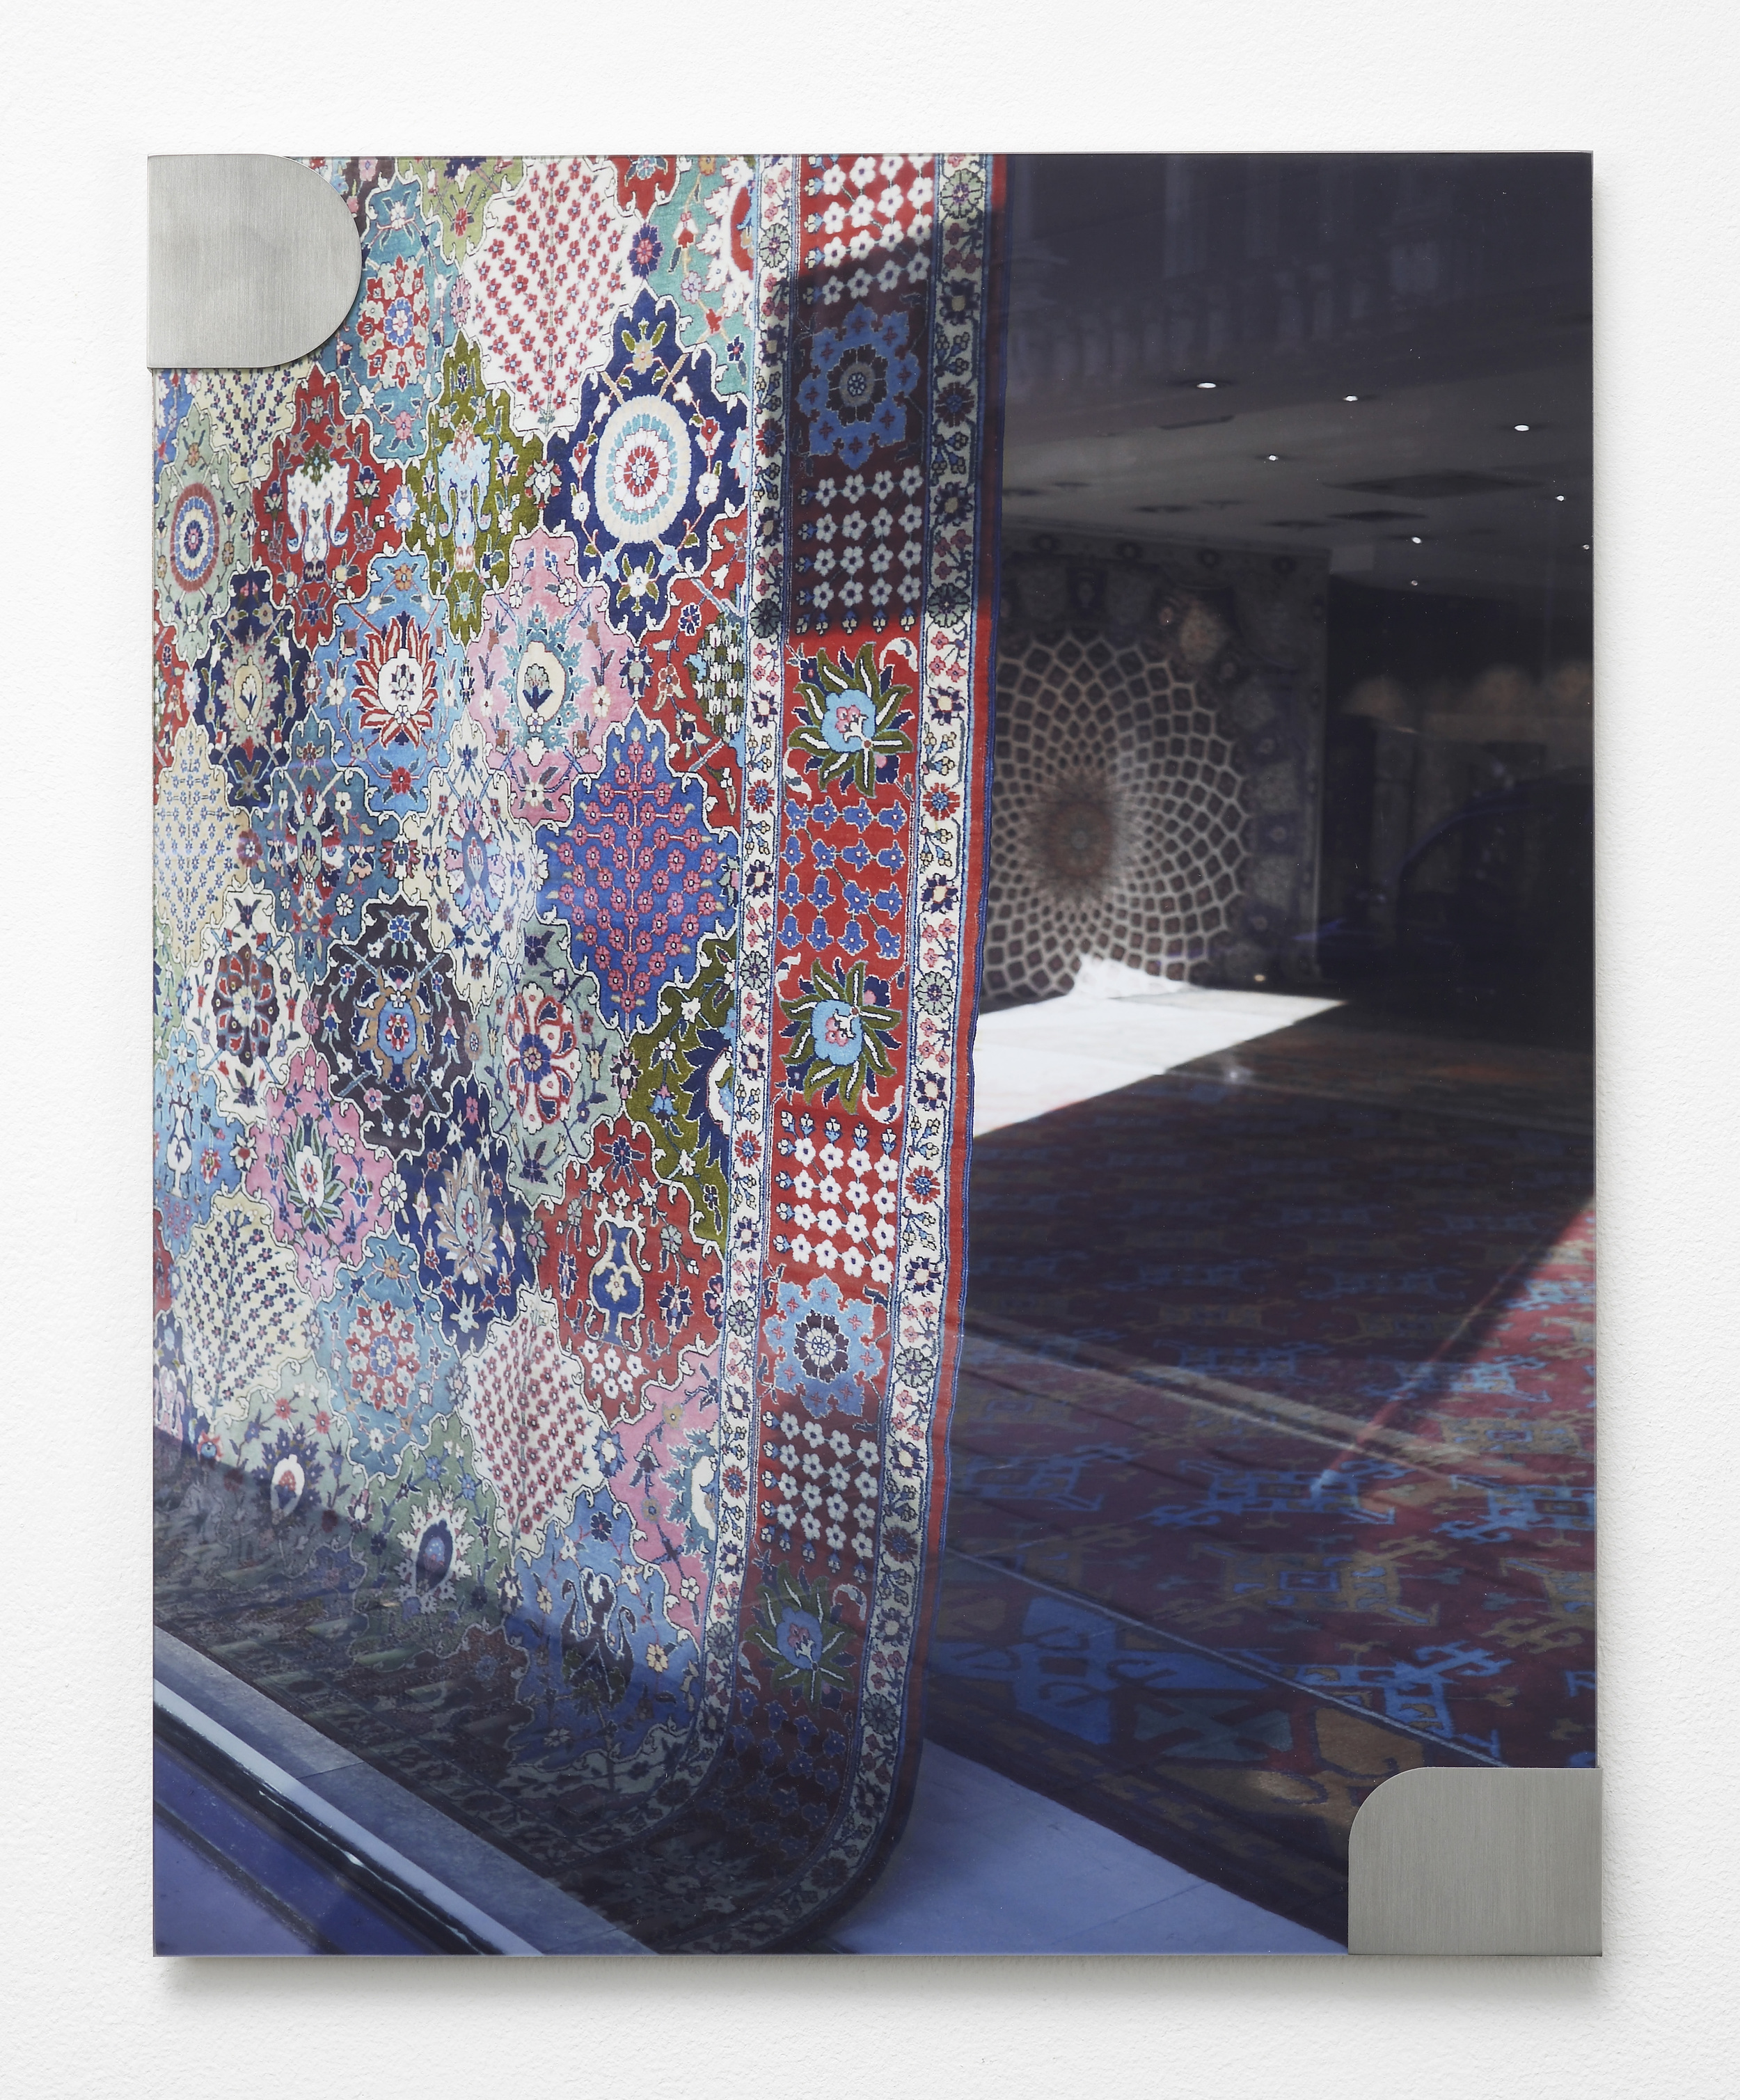     Nicole Wermers Carpets and Glass #1 2012 C-print, stainless steel clips, clip frame 50 x 40 cm 